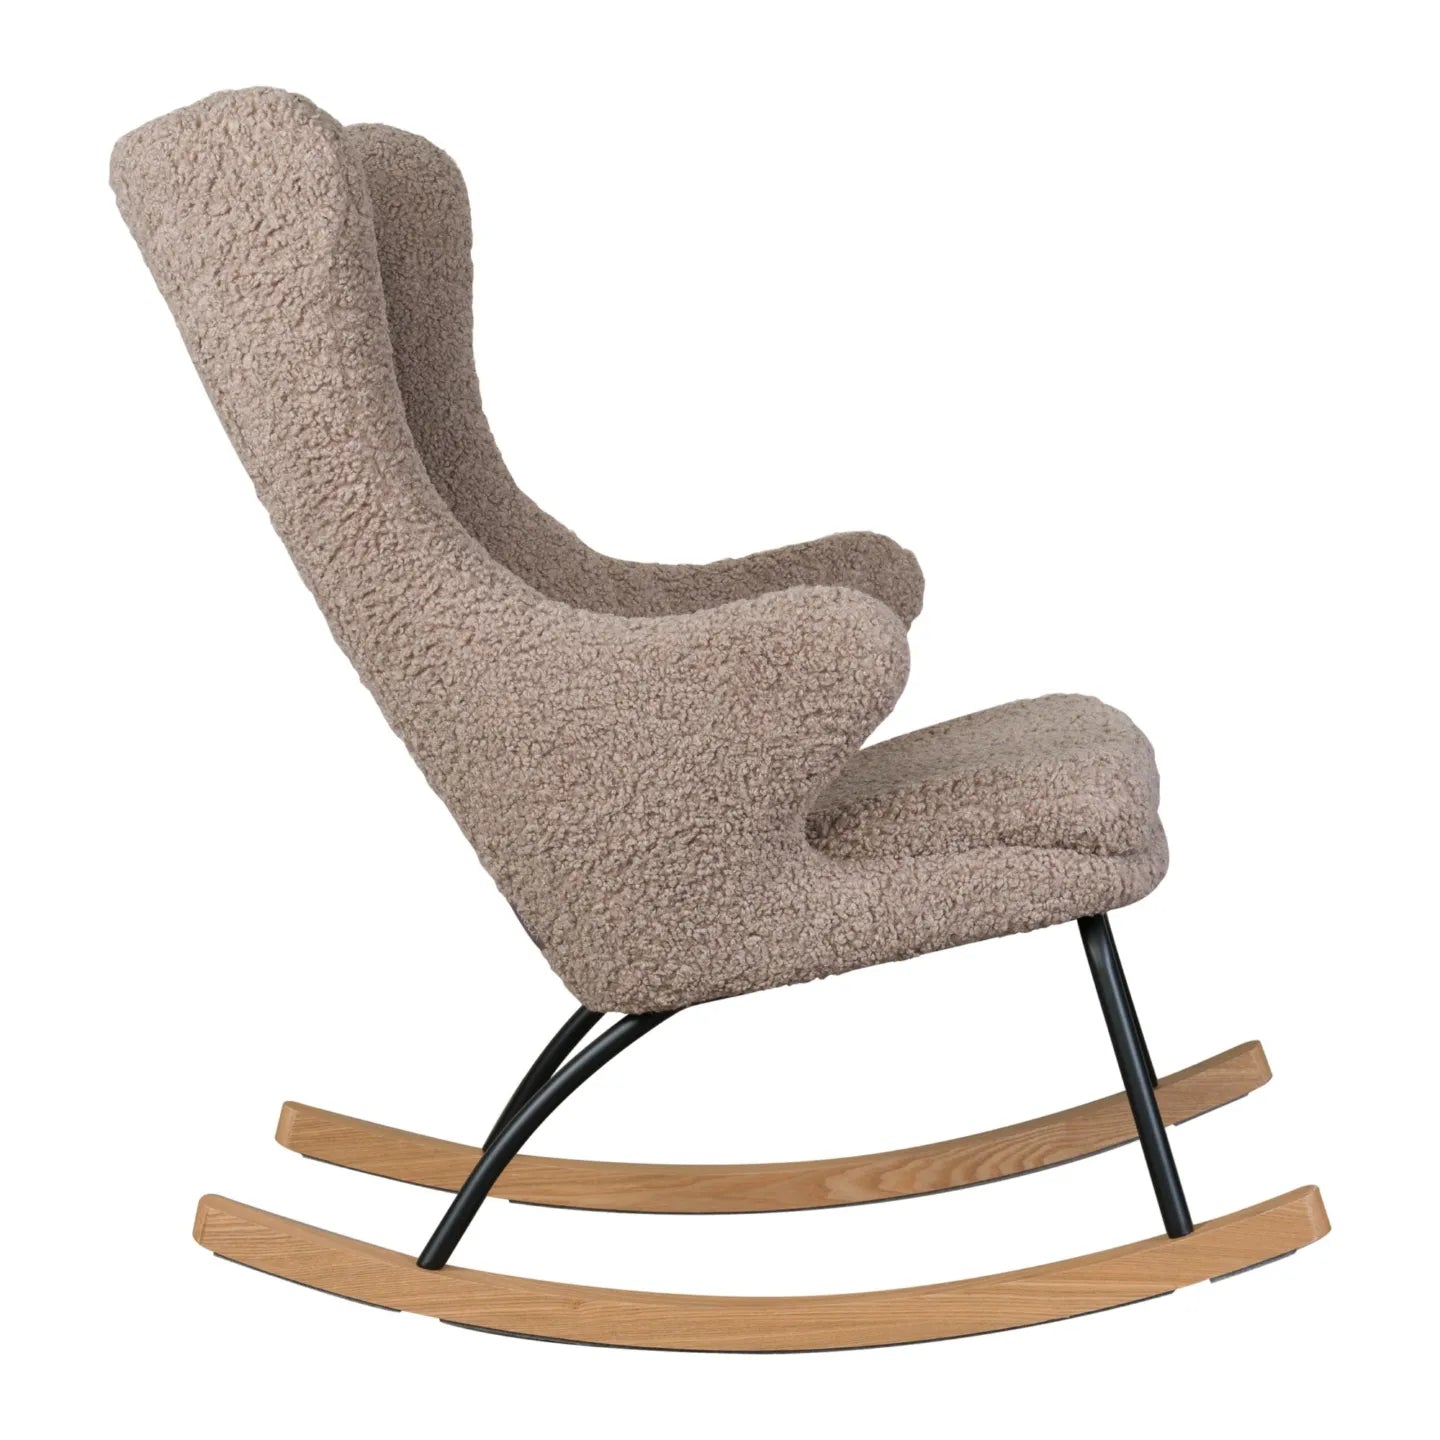 Rocking Chair De Luxe - Adult - Teddy - Stone